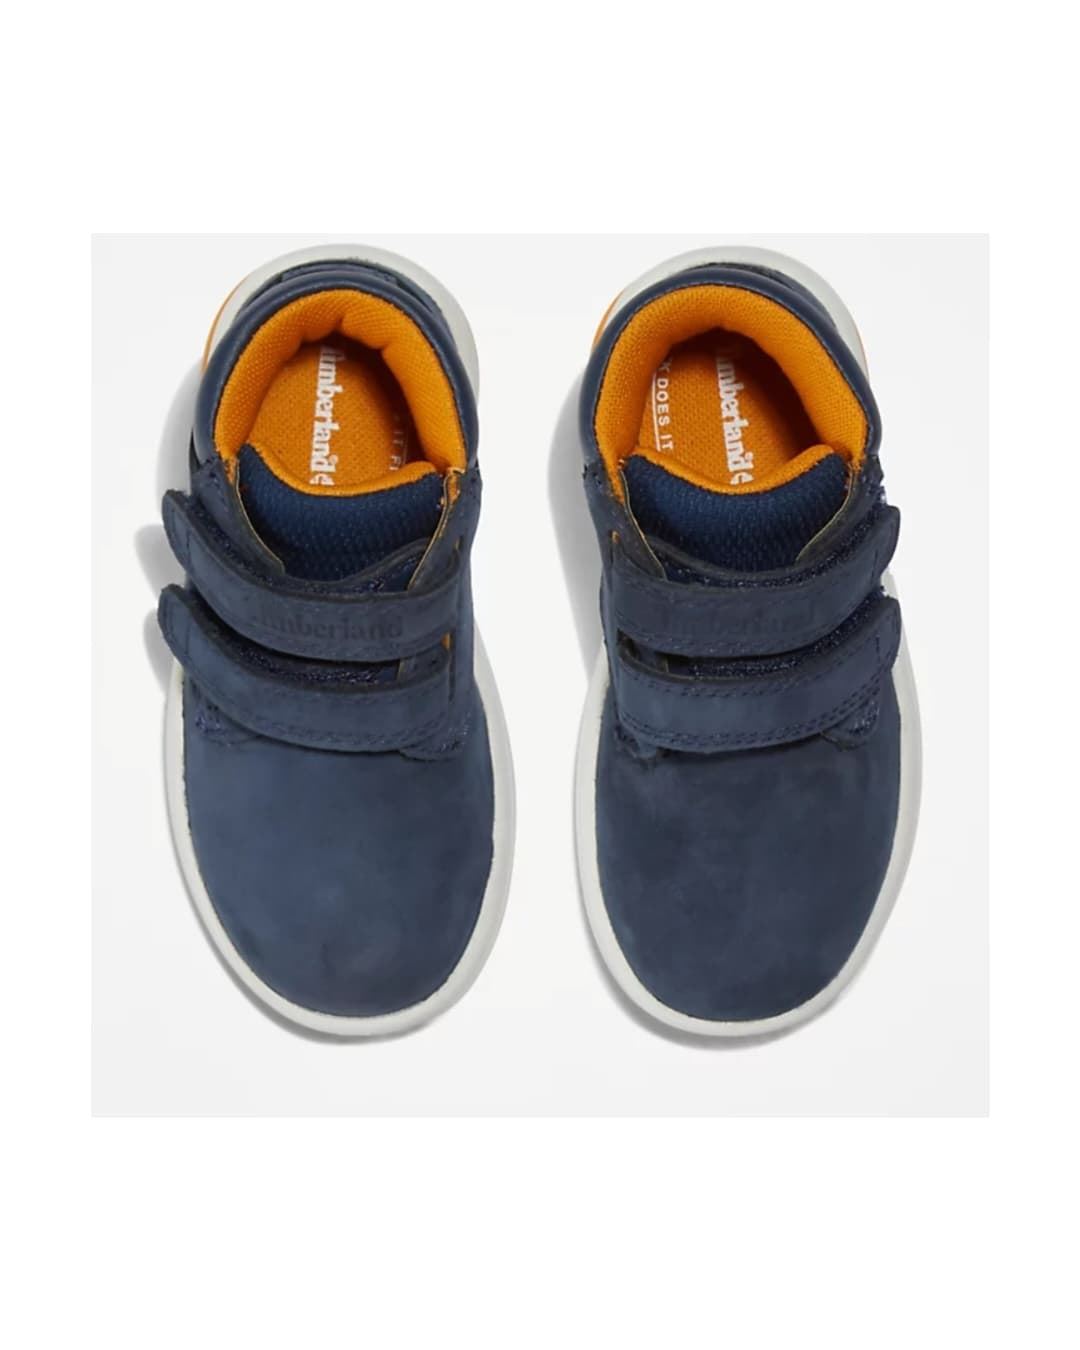 Timberland Boy's Boots Toddle Tracks Navy Blue - Image 4